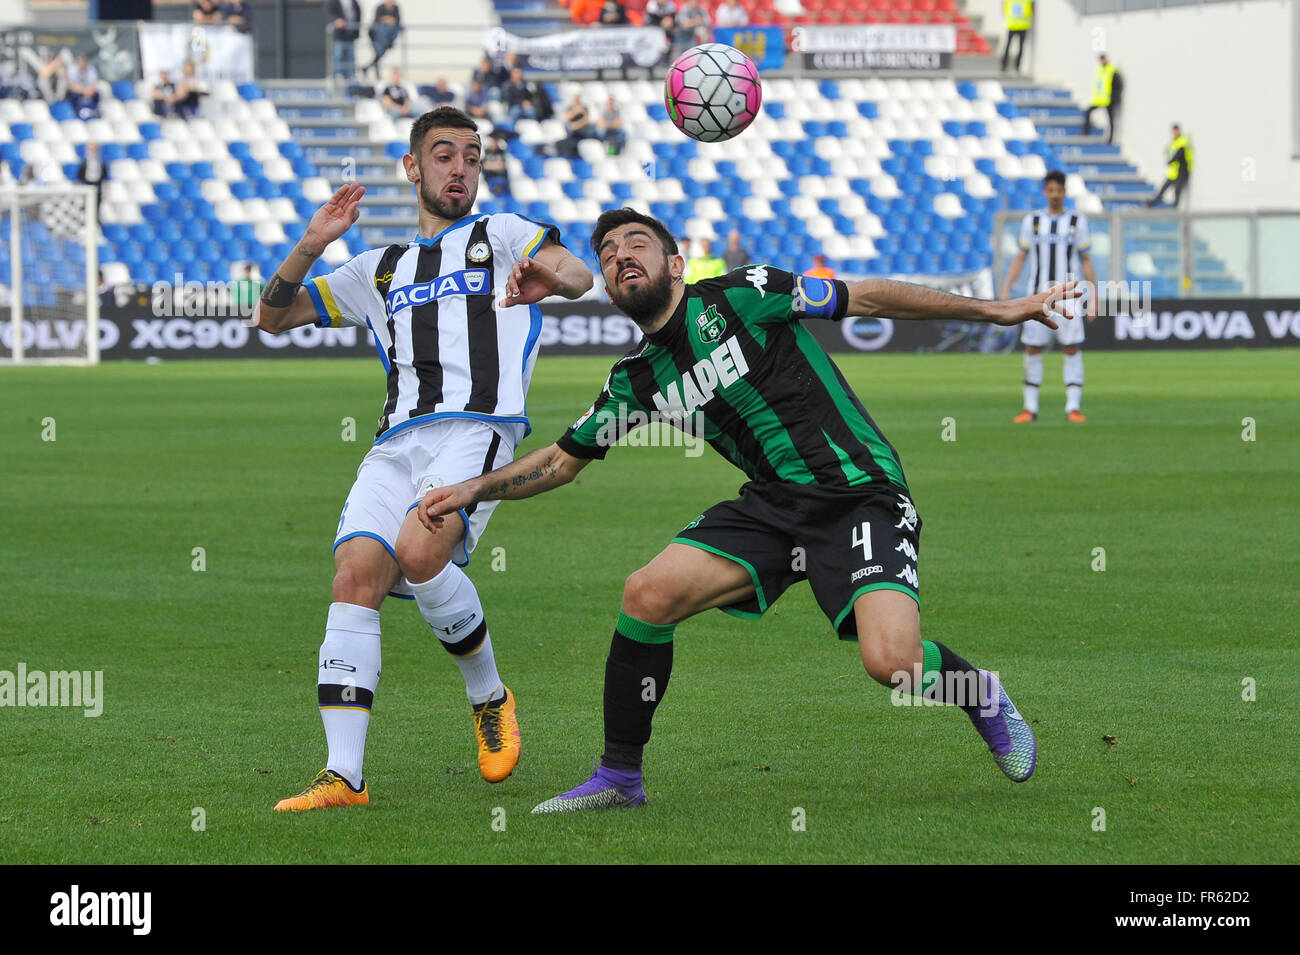 Reggio Emilia, Italy. 20th Mar, 2016. Bruno Miguel Borges Fernandes Udinese's midfielder and national team of Portugal and Francesco Magnanelli Sassuolo midfielder fight for the ball during the Serie A football match between US Sassuolo Calcio and Udinese Calcio at Mapei Stadium in Reggio Emilia. Udinese wins over Sassuolo 1-0. © Massimo Morelli/Pacific Press/Alamy Live News Stock Photo